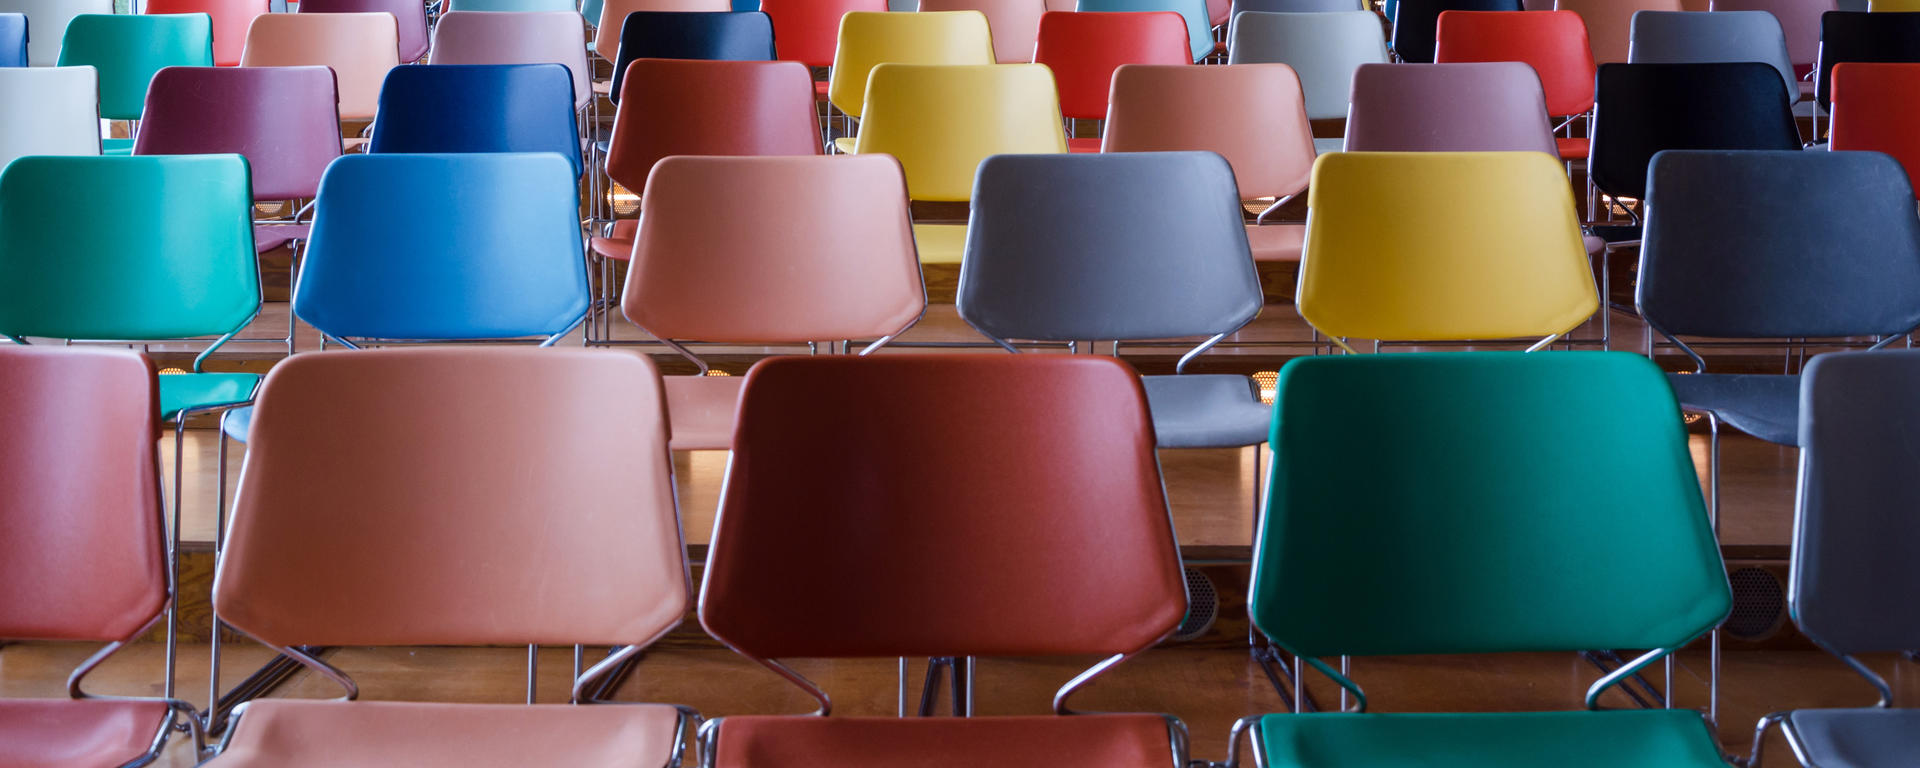 Image of different coloured chairs